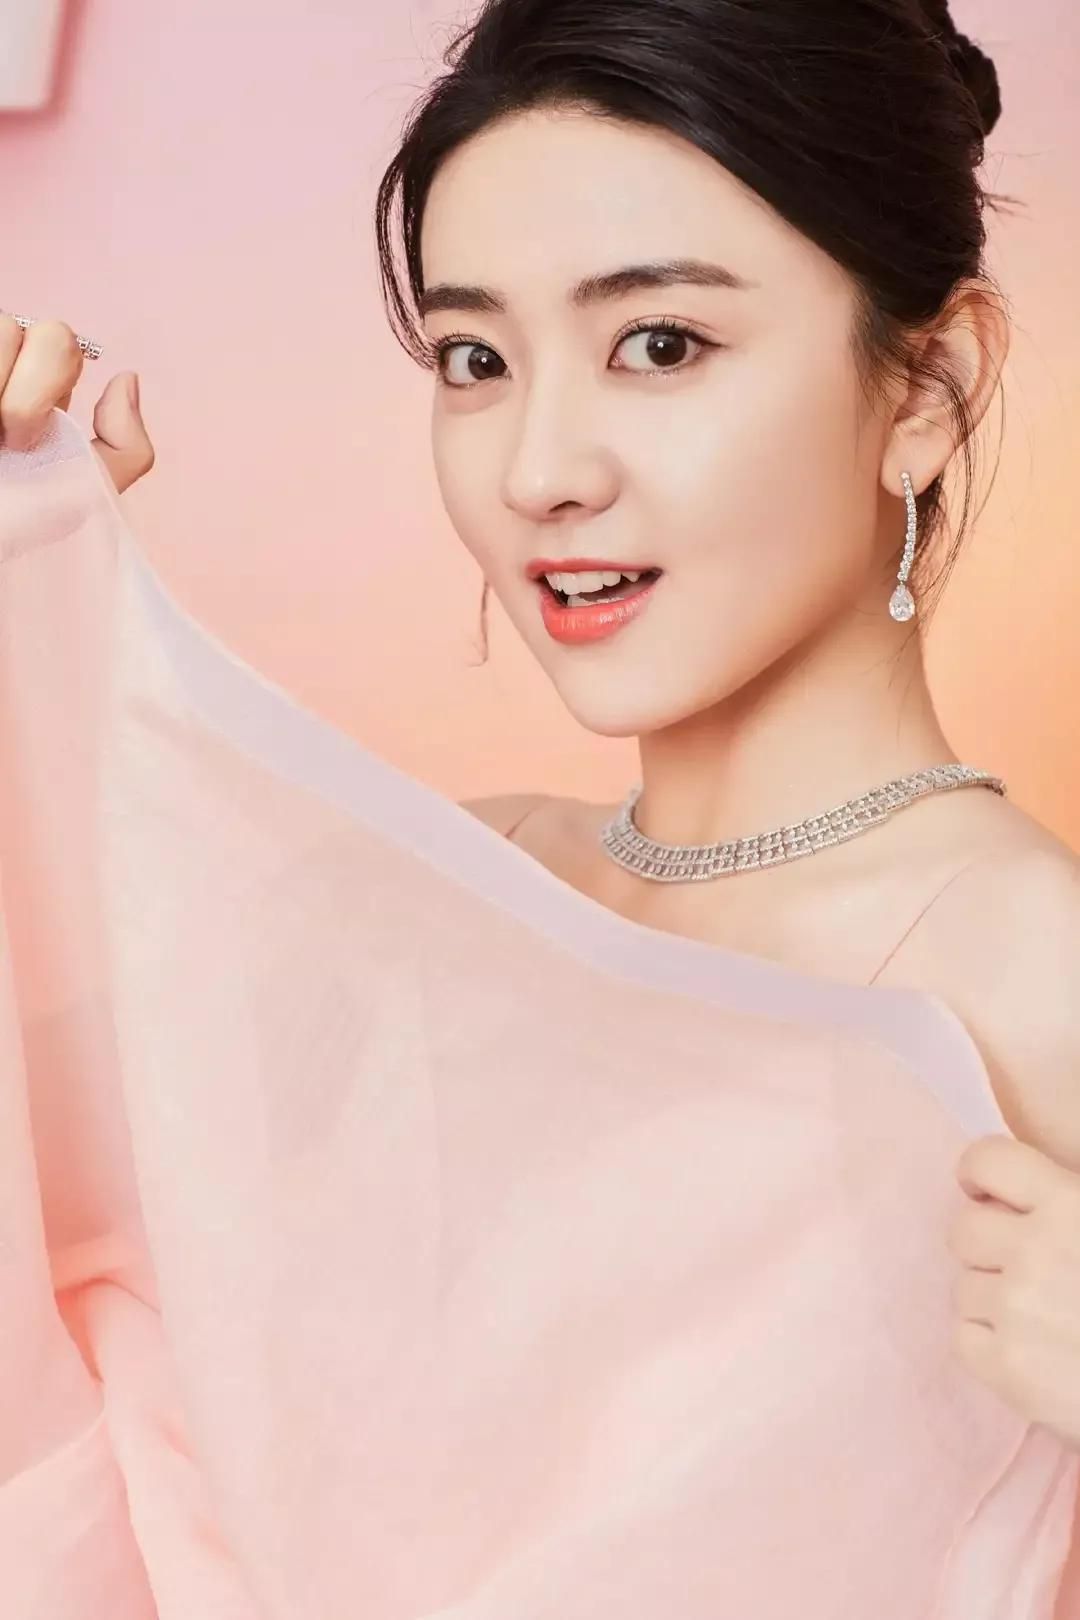 Liang Jie exquisite wallpaper: looks very sweet, unknowingly people like her